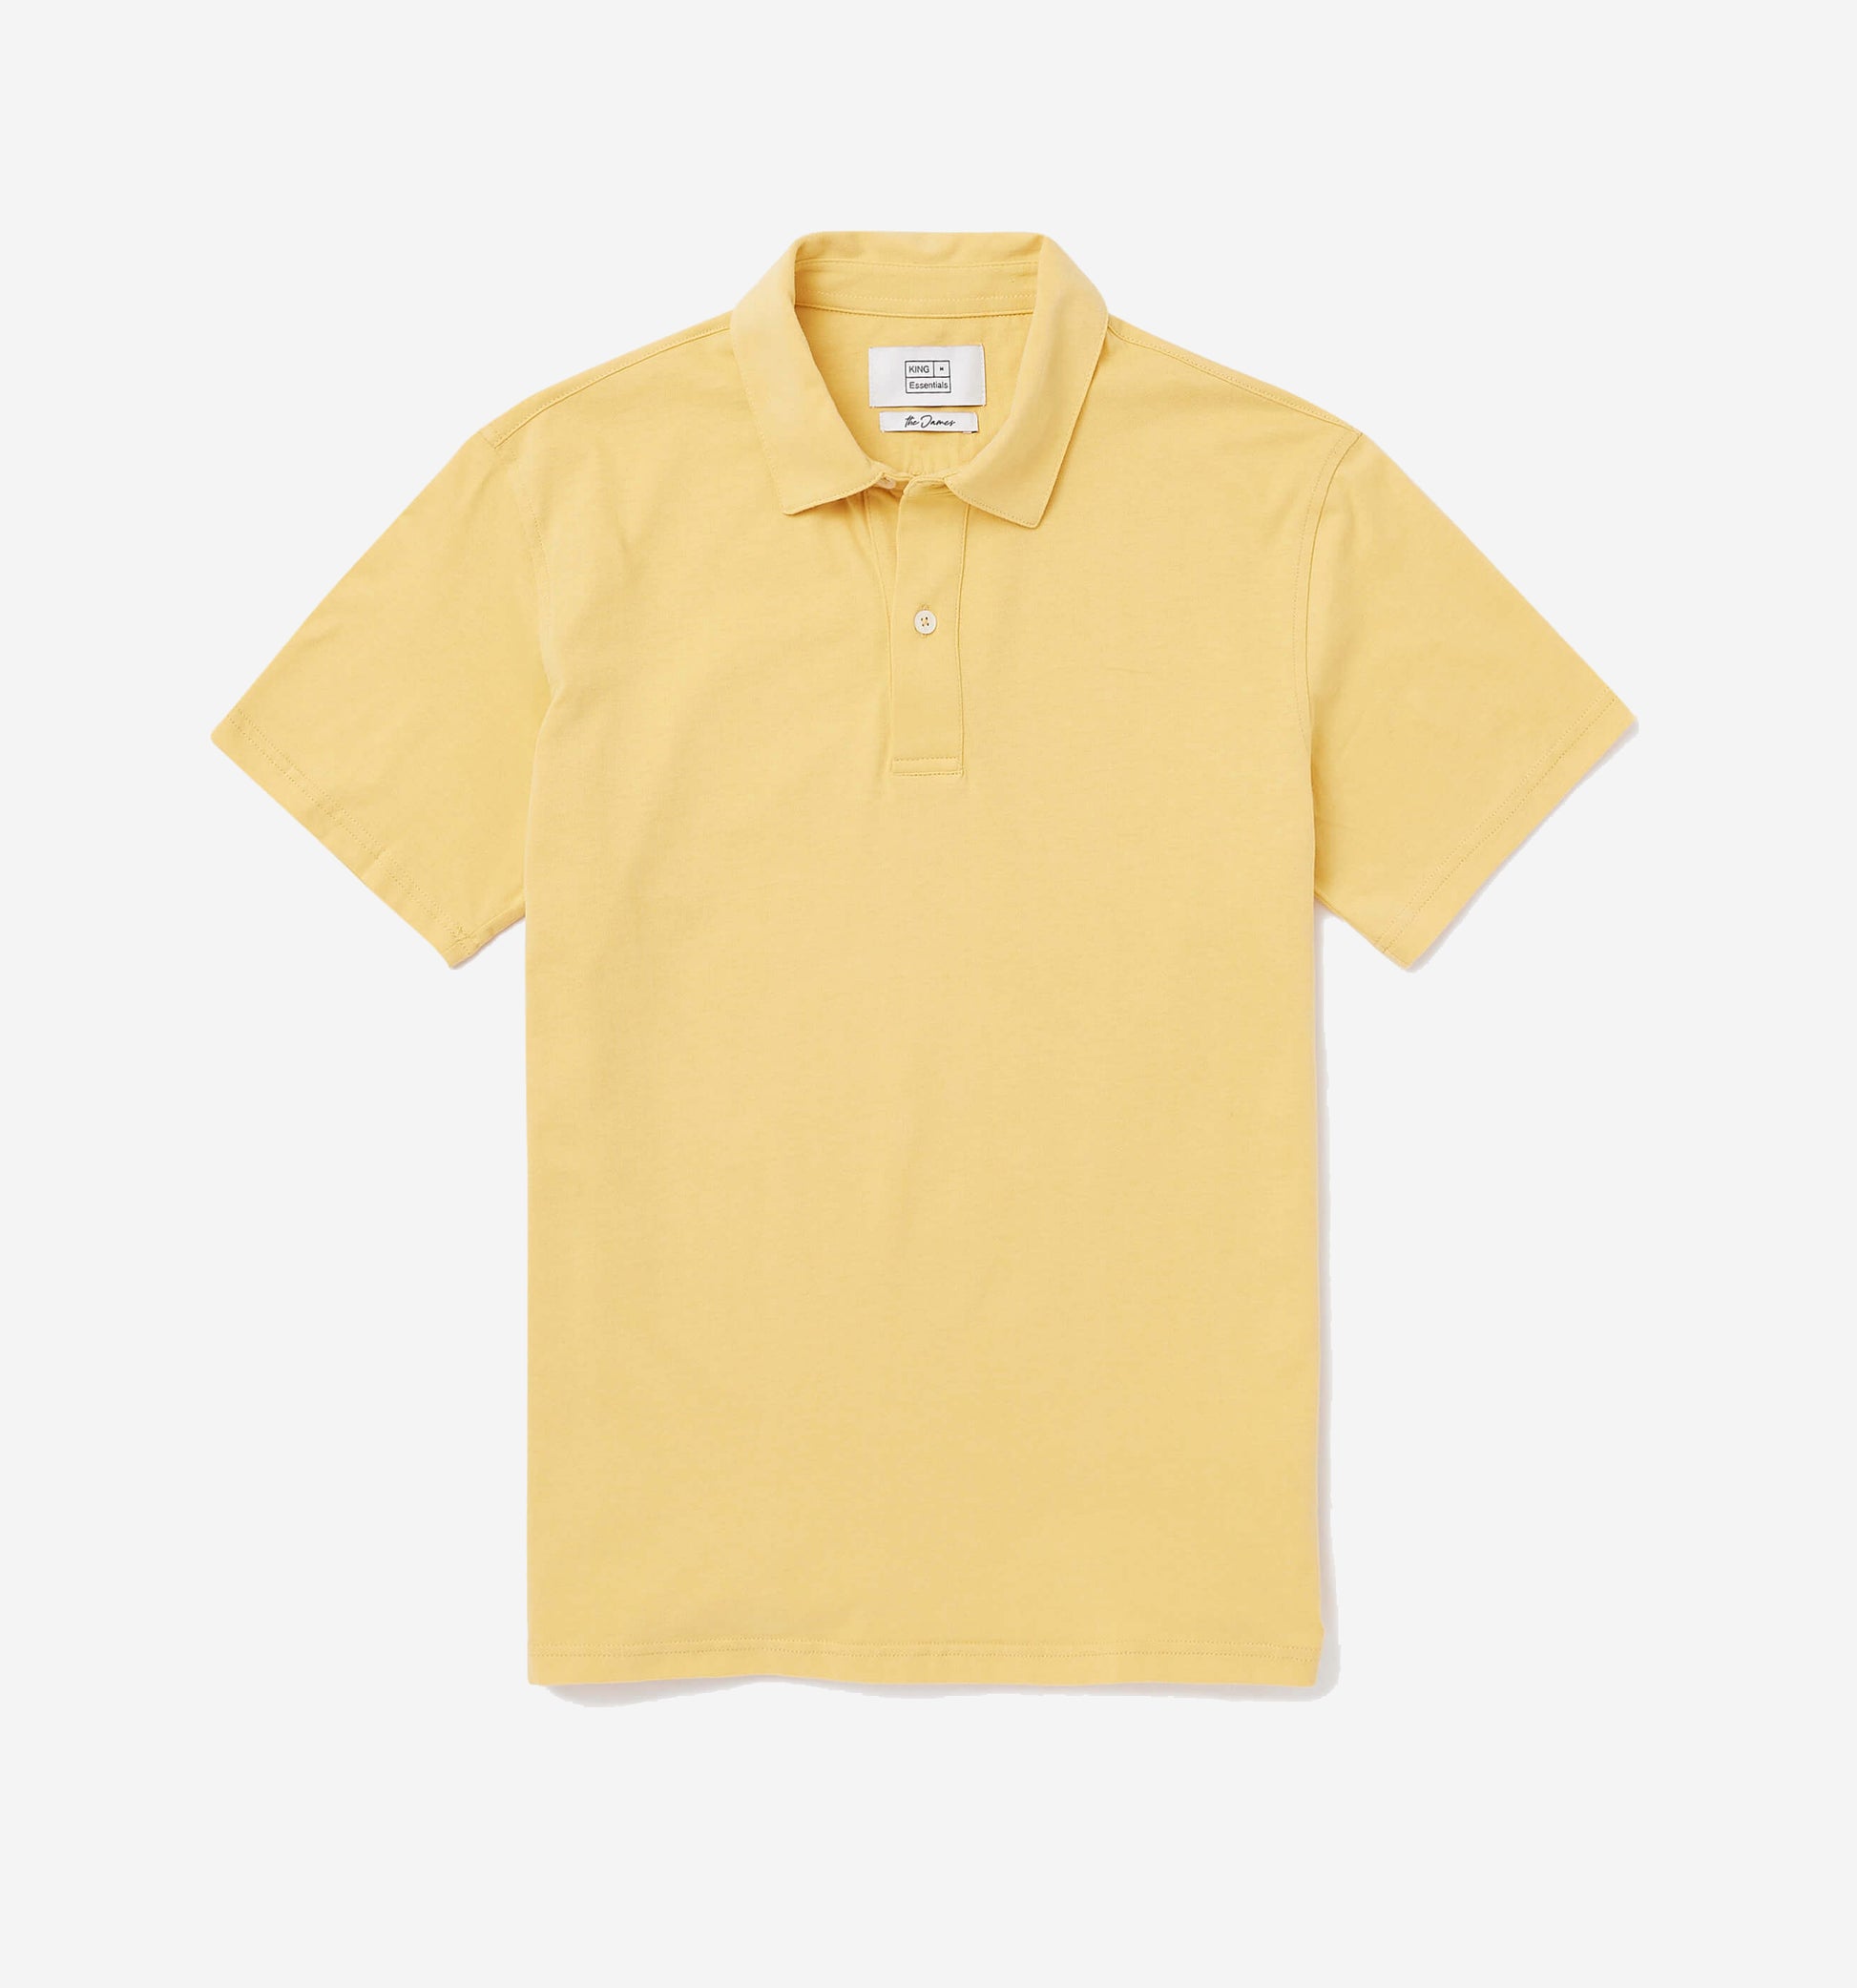 The James - Jersey Cotton Polo In Dark Yellow From King Essentials